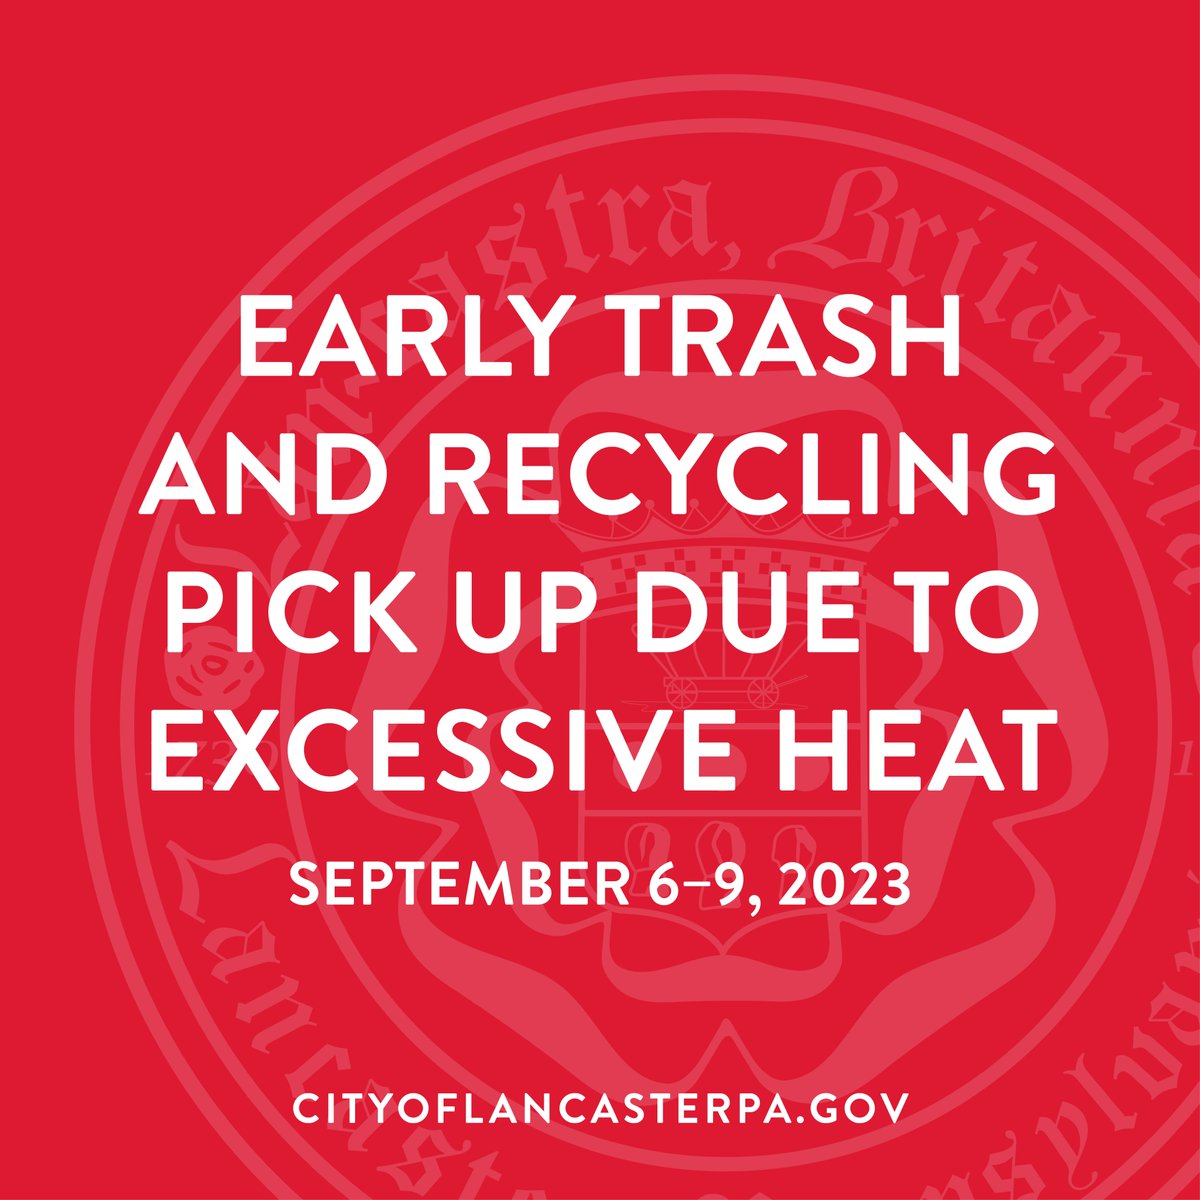 Due to forecasted excessive heat, Penn Waste will begin trash & recycling pick up at 4:00AM Sept 6–9. Please be sure to have your bagged trash/recycling at the curb prior to this time. Reminder: trash/recycling pick ups are delayed one day this week due to the Labor Day holiday.